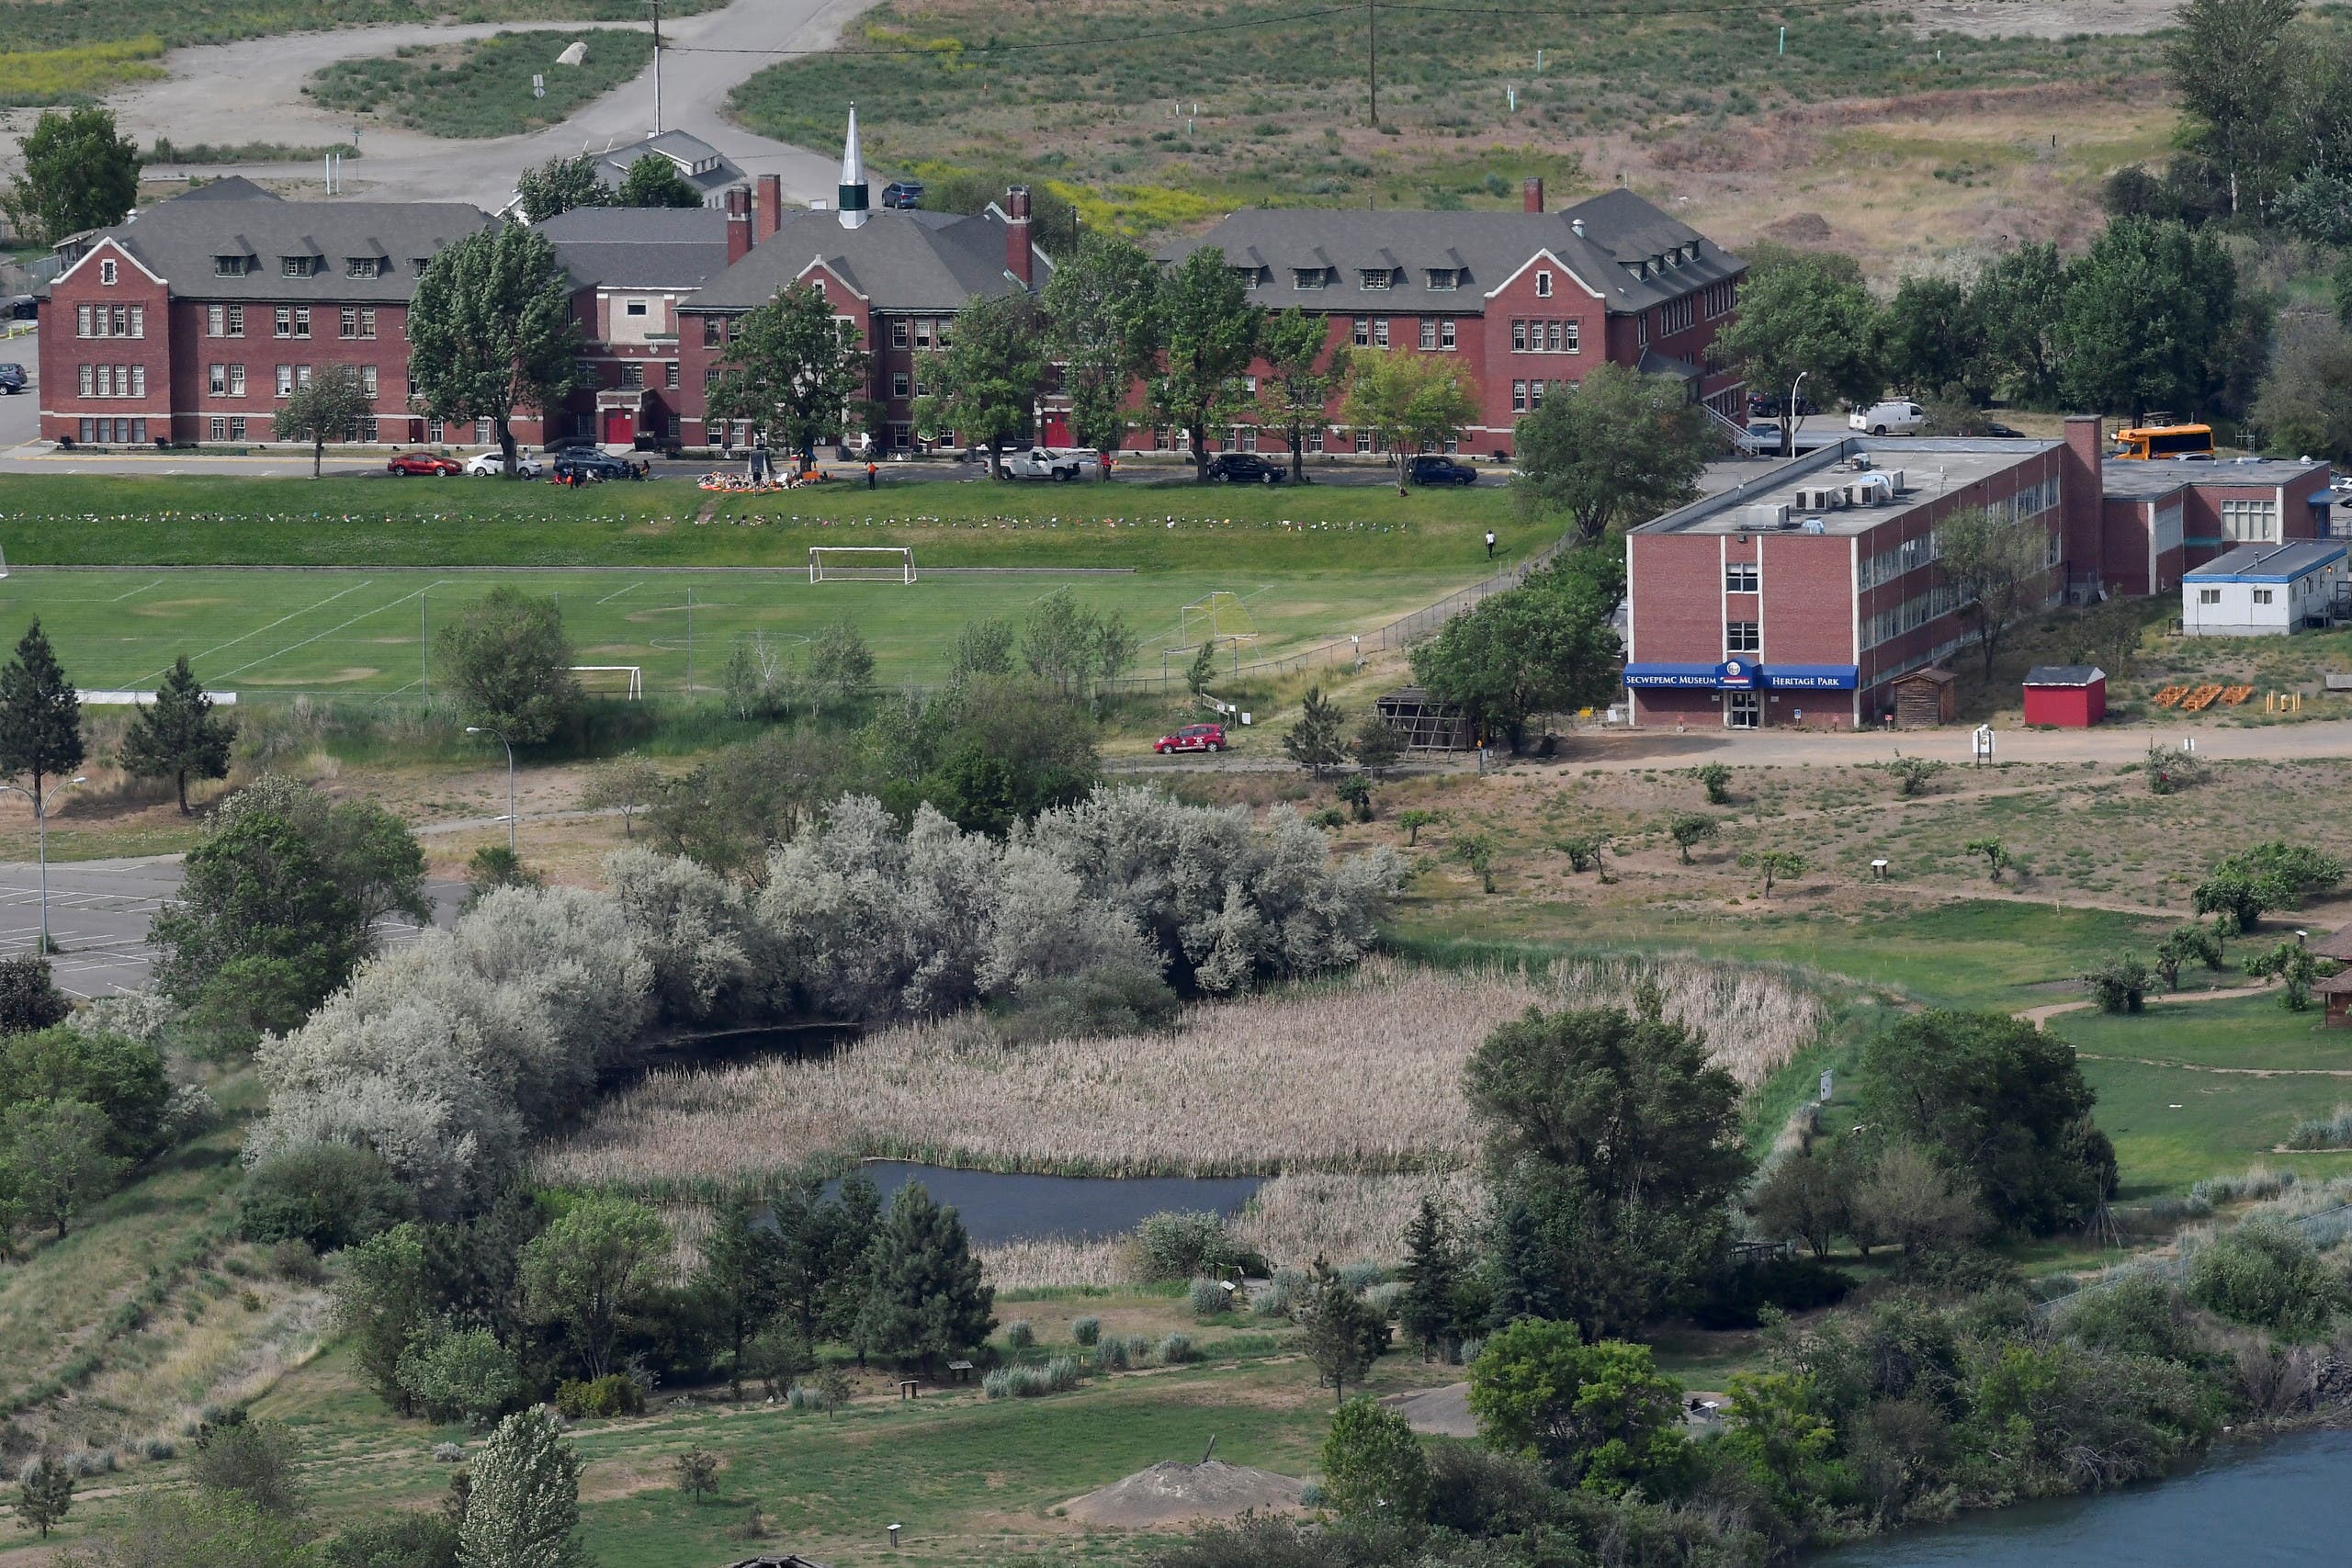 The grounds of the former Kamloops Indian Residential School are seen after the remains of 215 children, some as young as three years old, were found at the site in Kamloops, British Columbia, Canada June 4, 2021. (Reuters)